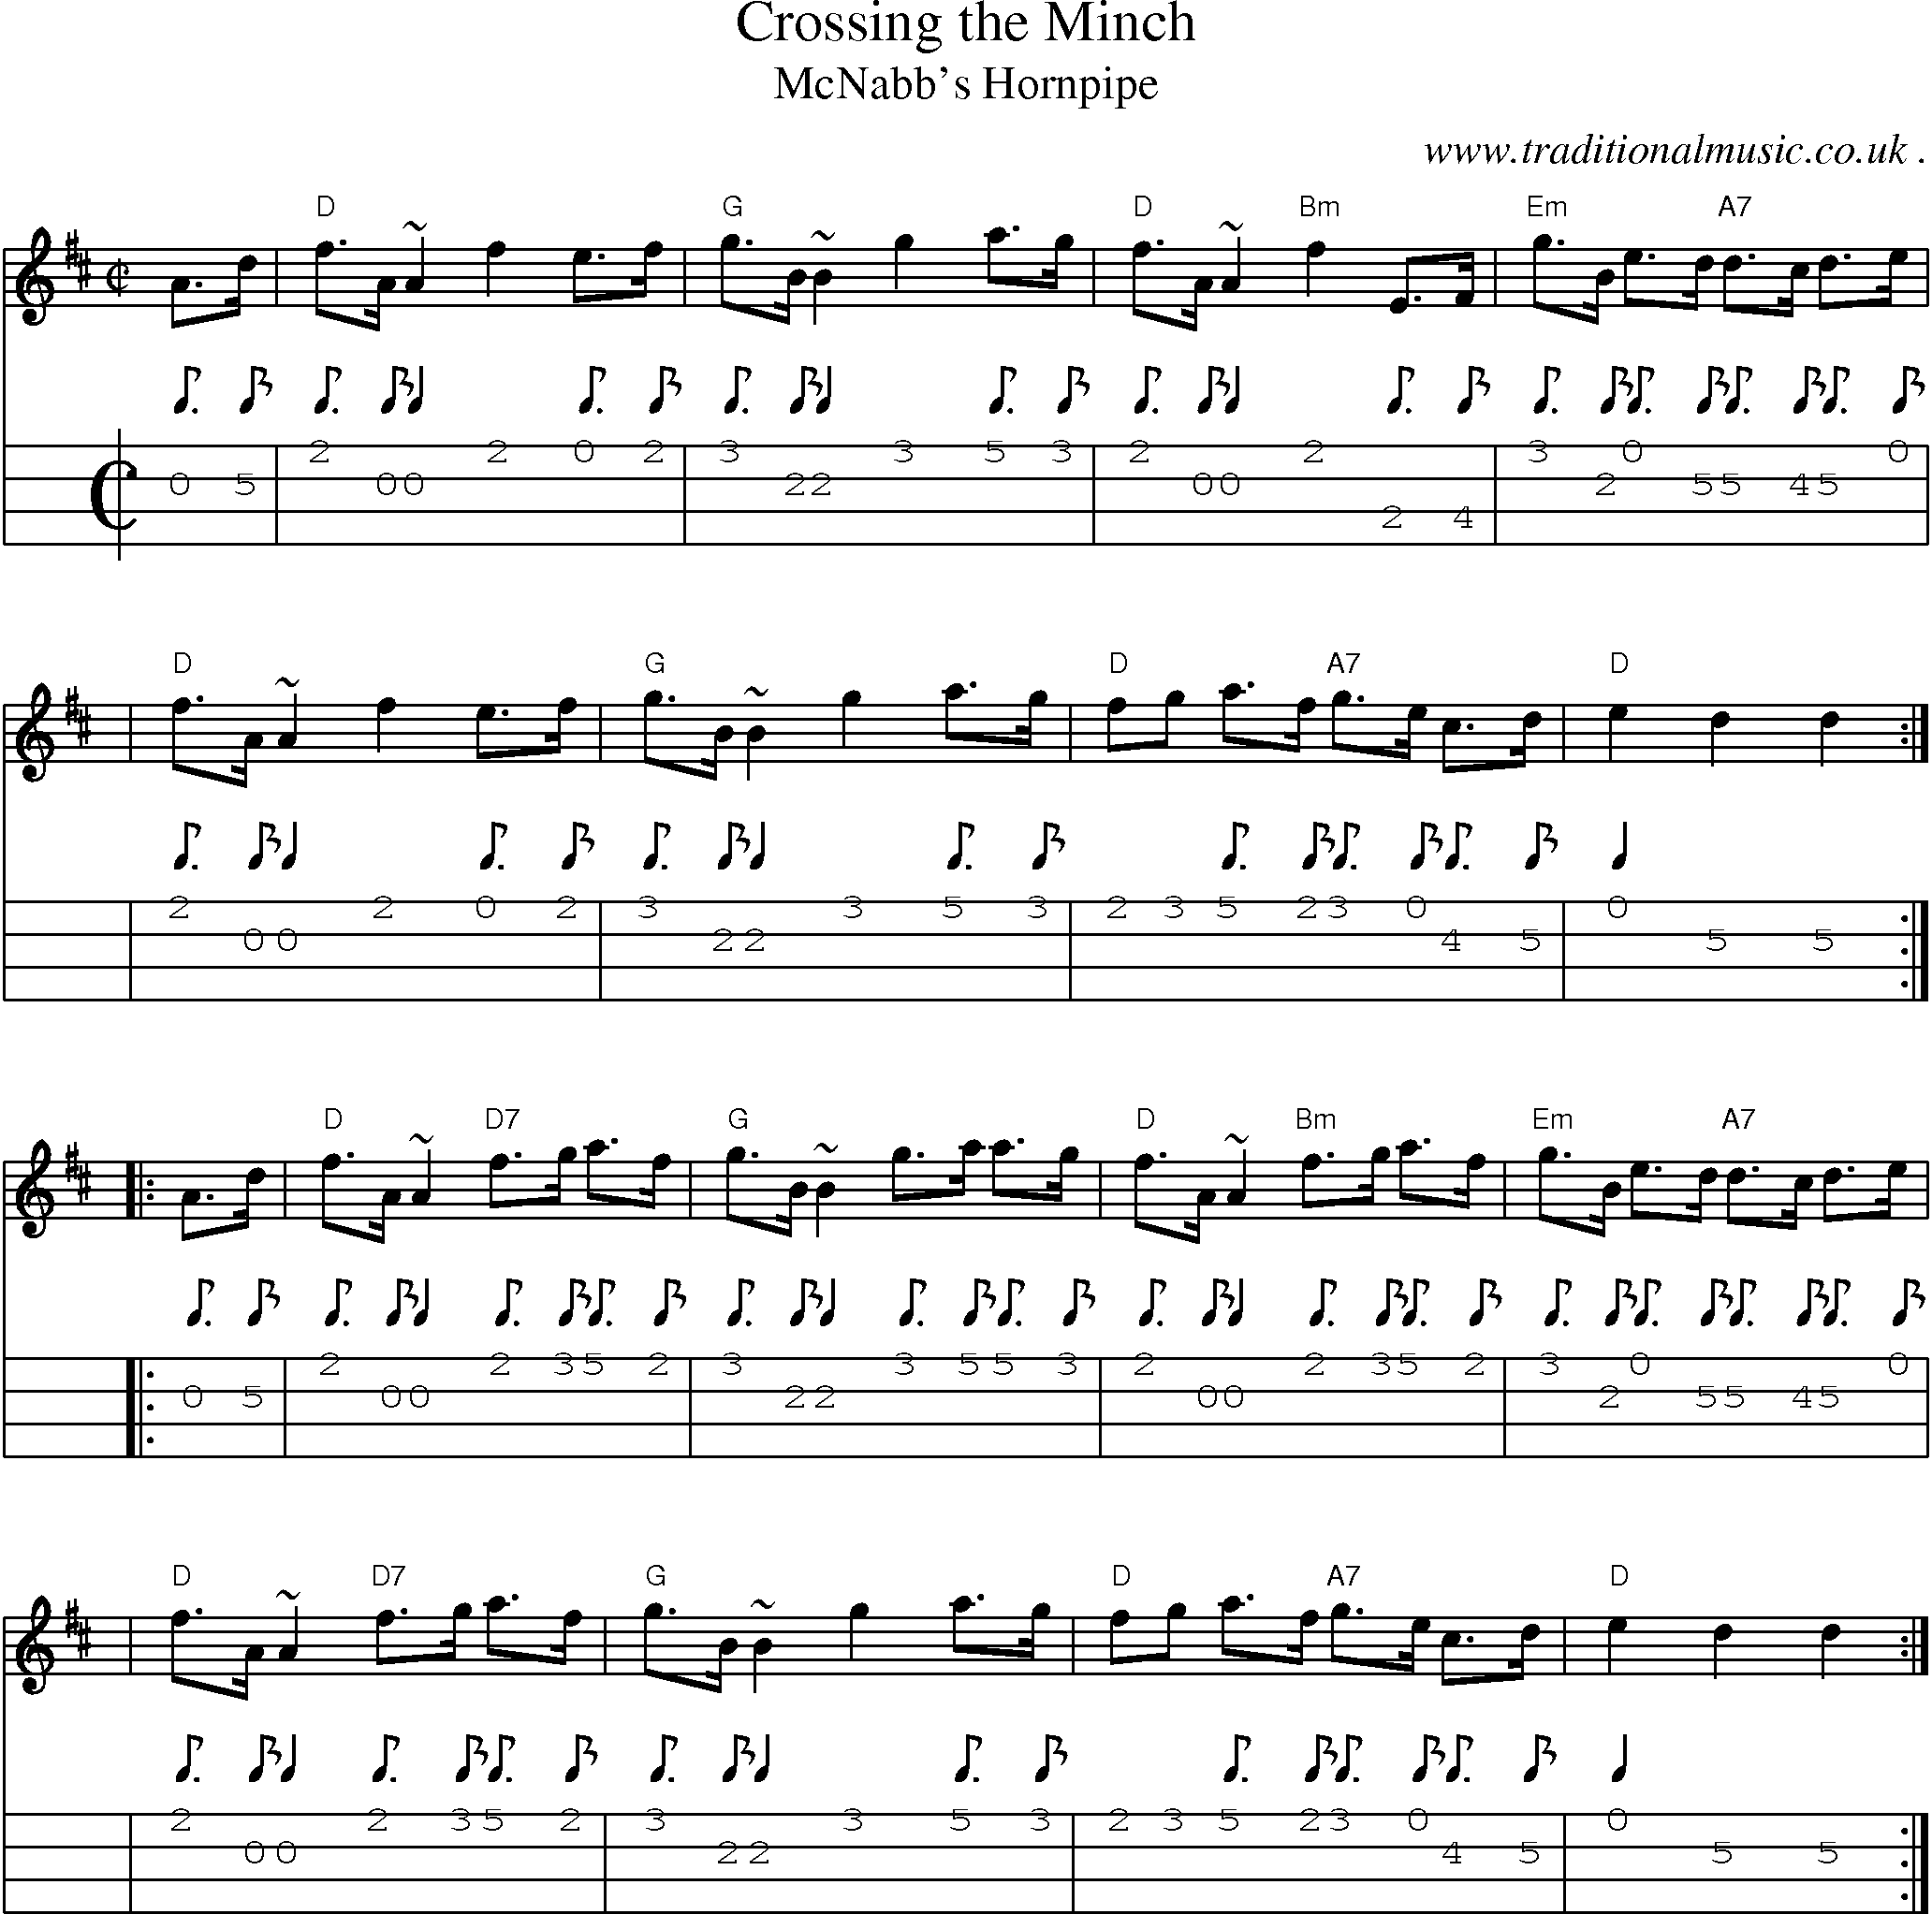 Sheet-music  score, Chords and Mandolin Tabs for Crossing The Minch